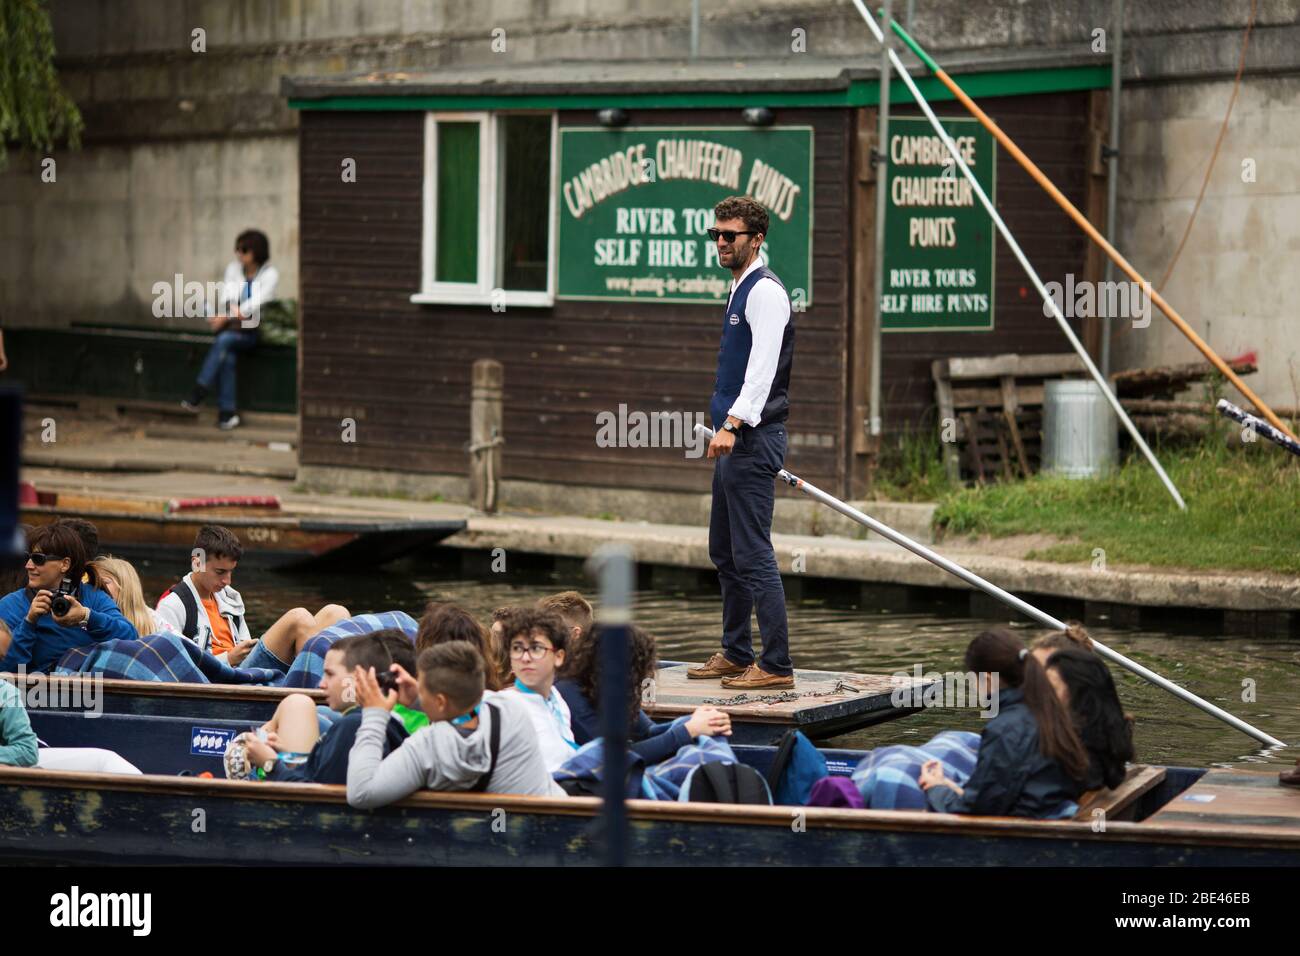 A punter gets ready to lead a tour group on a punt down the river Cam in Cambridge, England, United Kingdom. Stock Photo